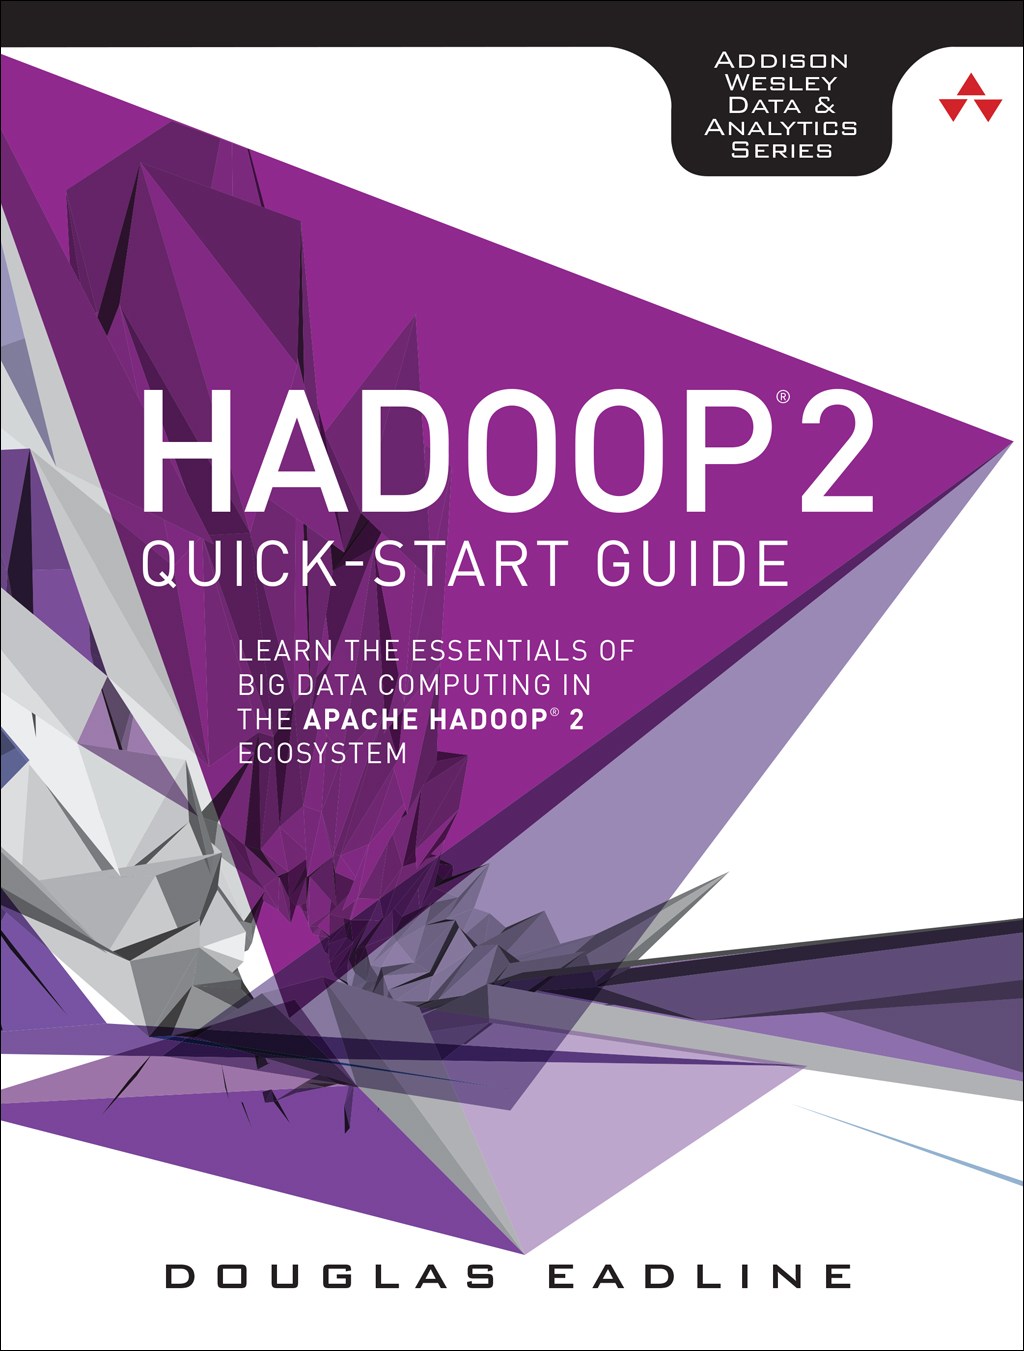 hadoop-2-quick-start-guide-learn-the-essentials-of-big-data-computing